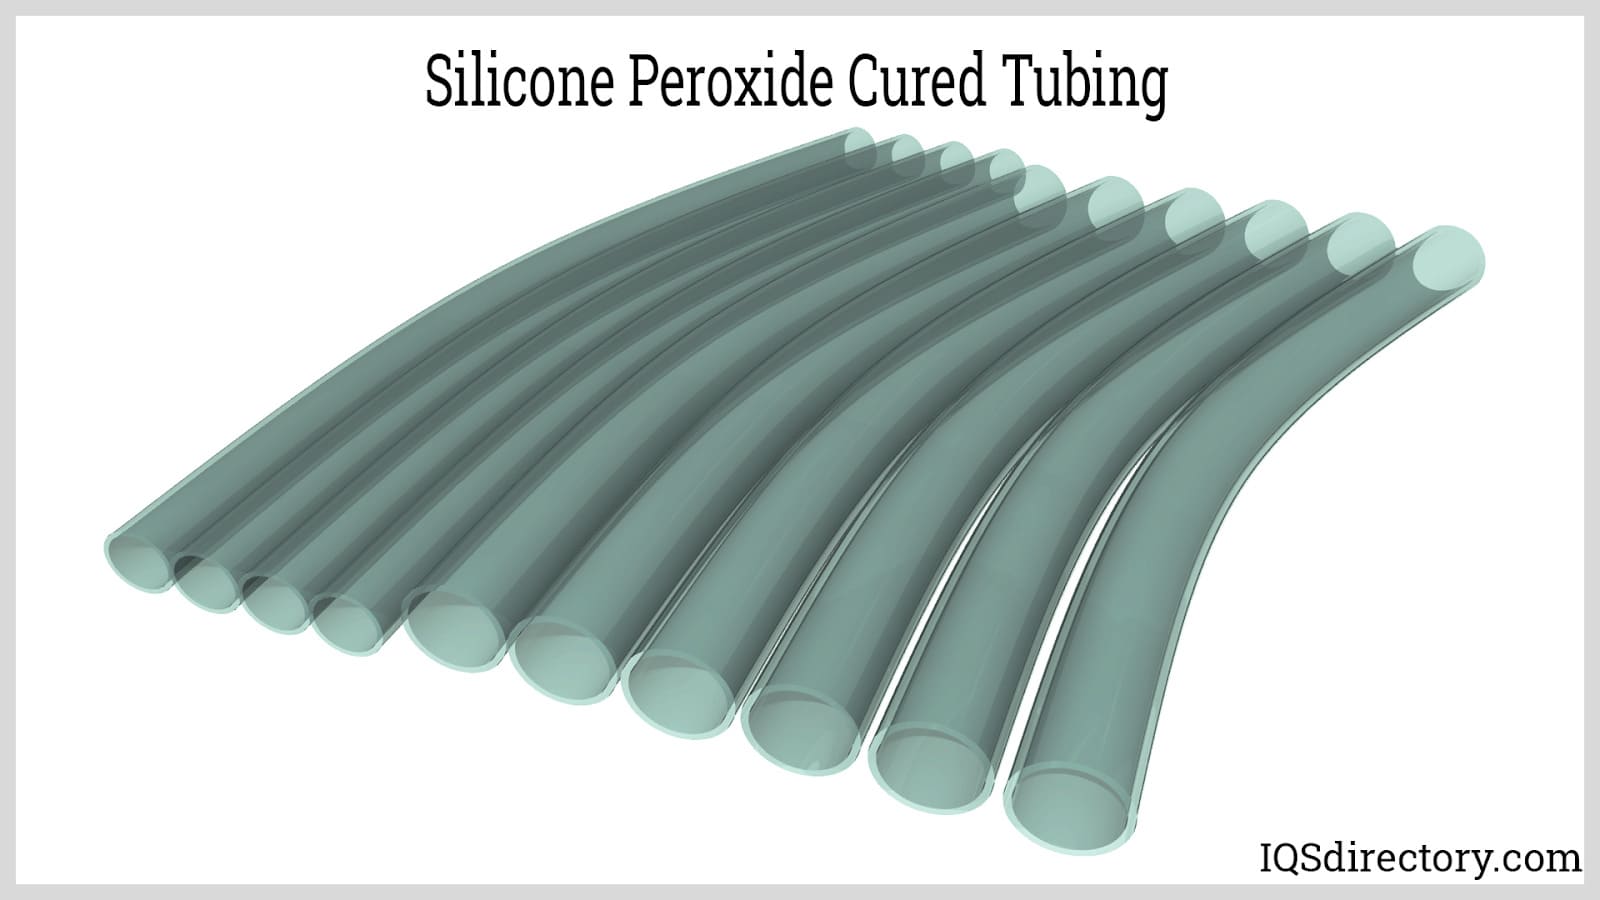 Silicone Peroxide Cured Tubing